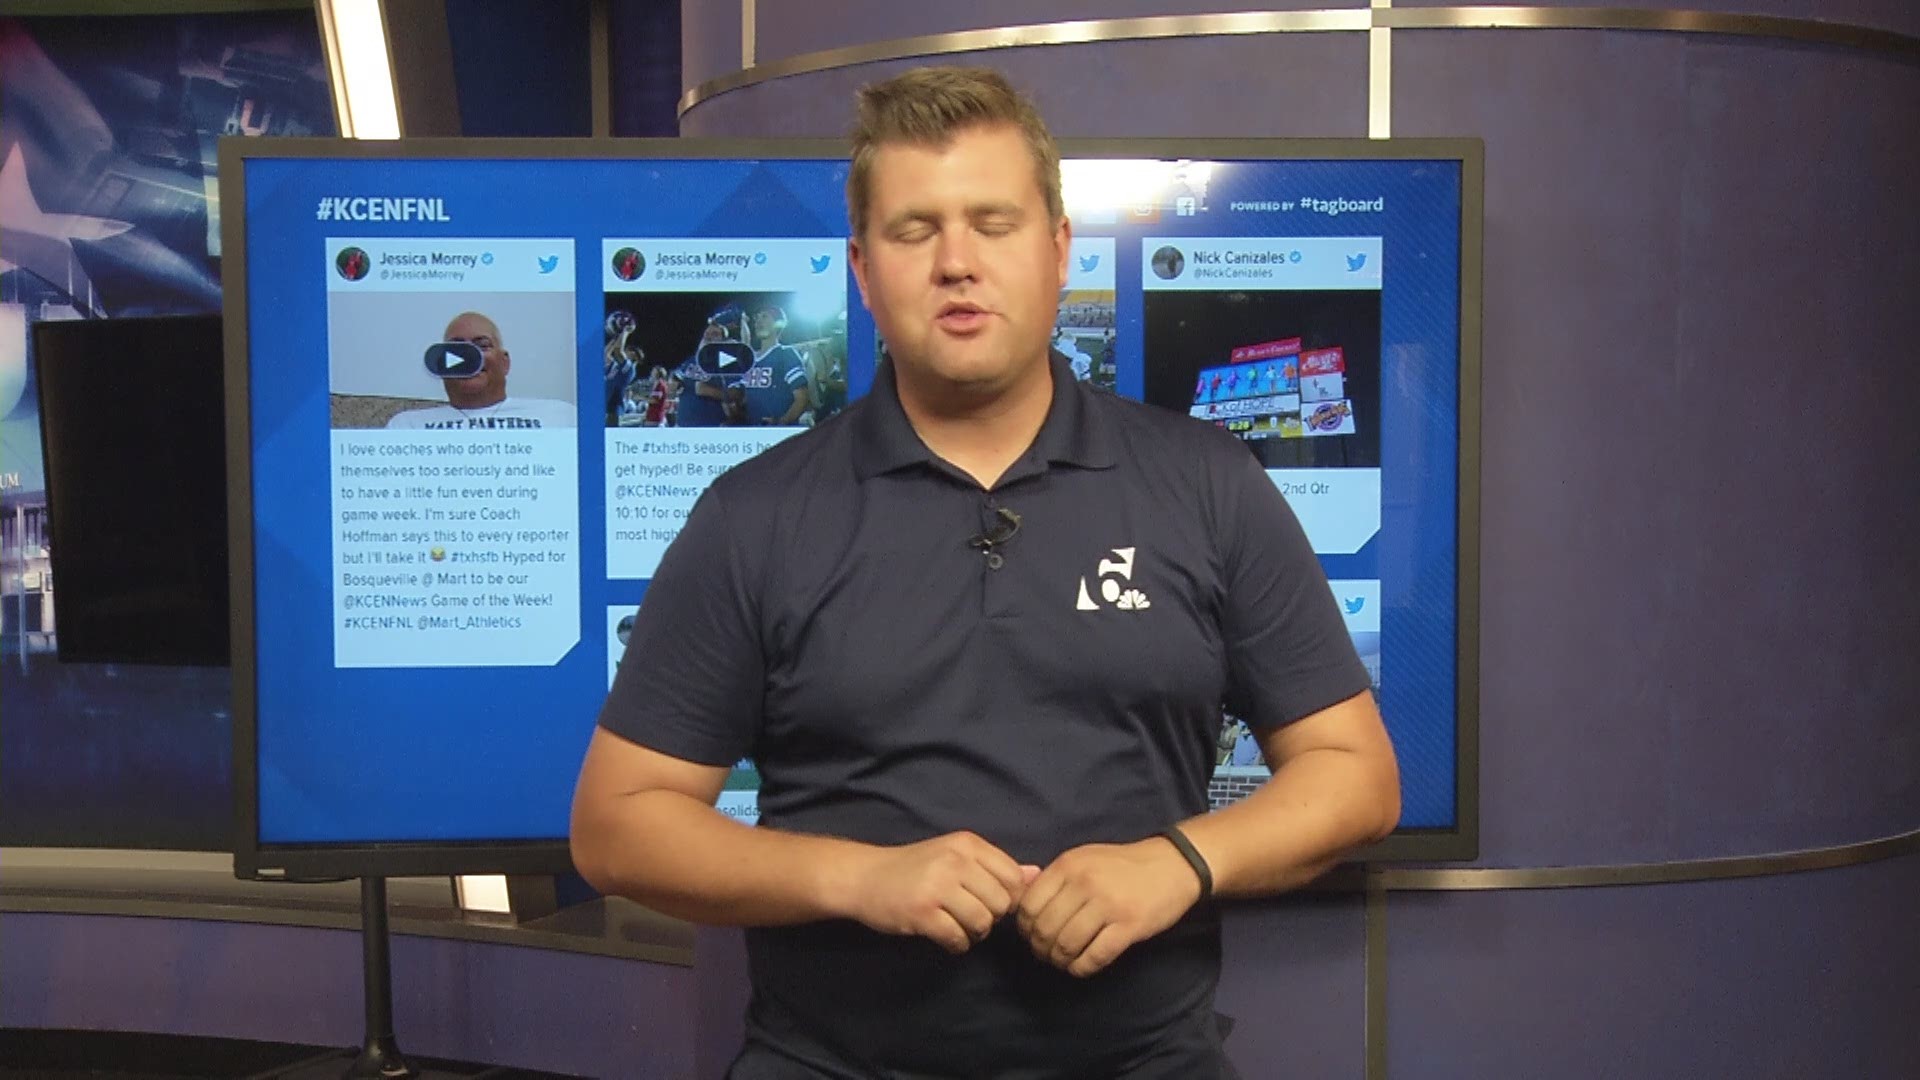 Here's how to see your FNL social media posts on TV!